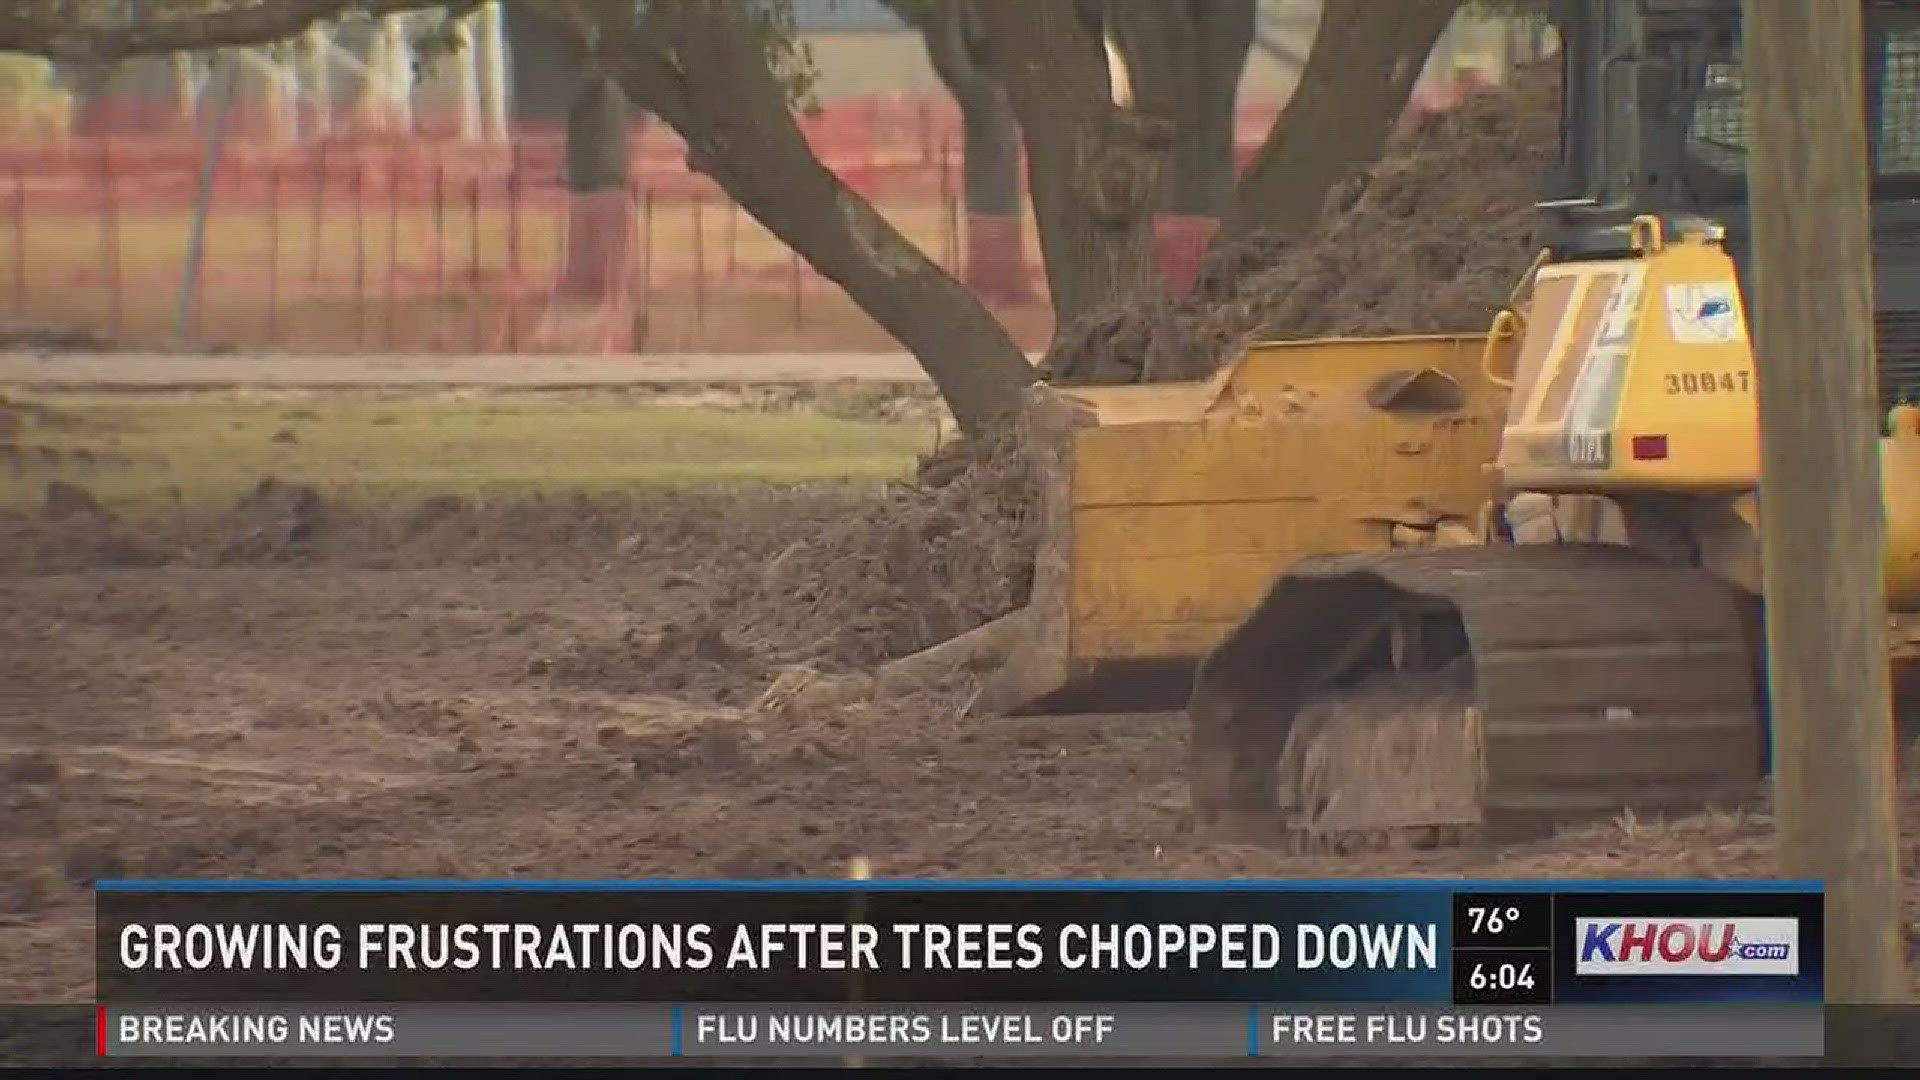 Friday at Independence Park in Pearland,  there were bulldozers and dump trucks where old oak trees once stood. Nearly 30 trees were removed over the last week, some between 75 and 100 years old. It's part of a project to improve drainage at Independence